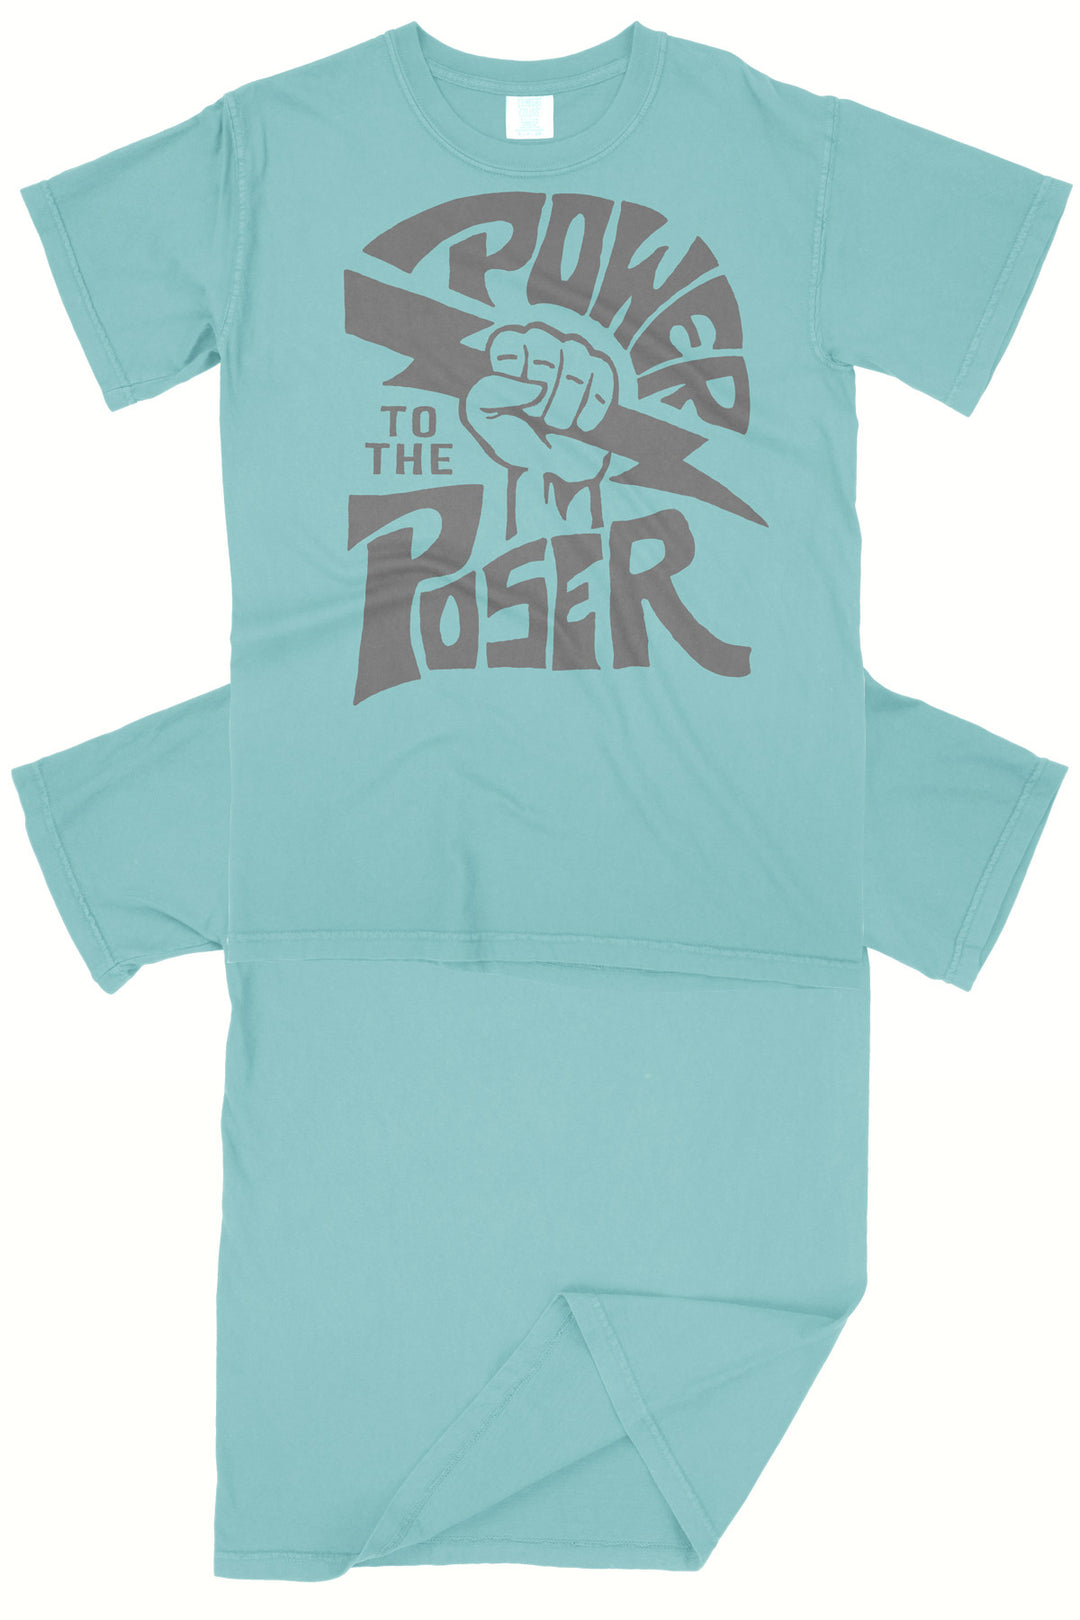 Power to the POSER Tshirt